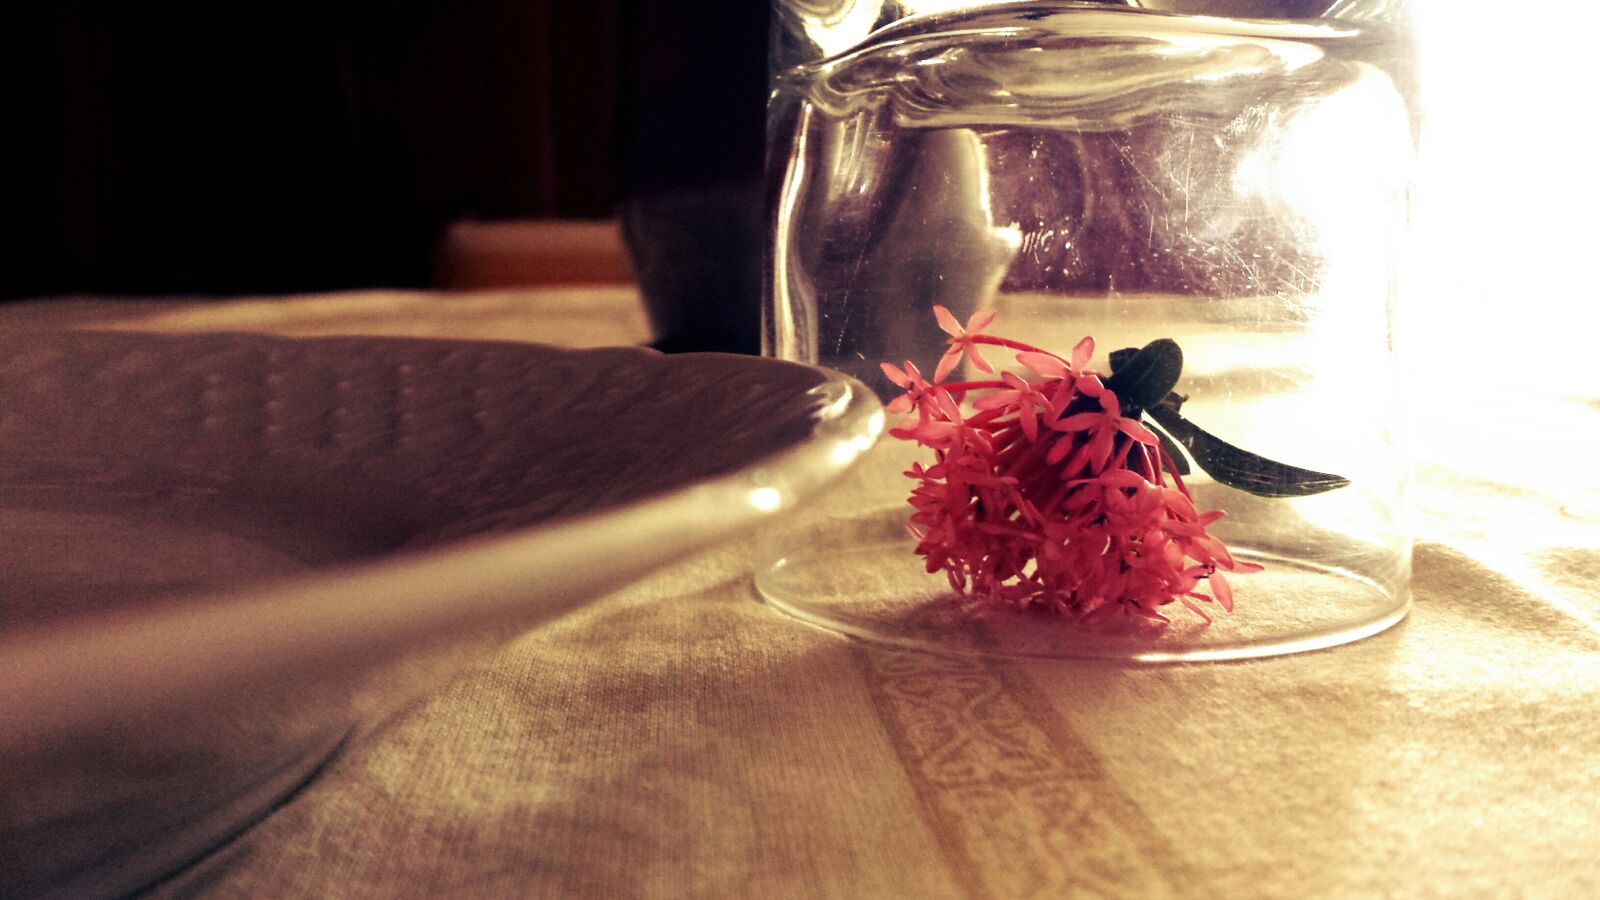 Samsung Galaxy S4 sample photo. Flower, glass, table photography